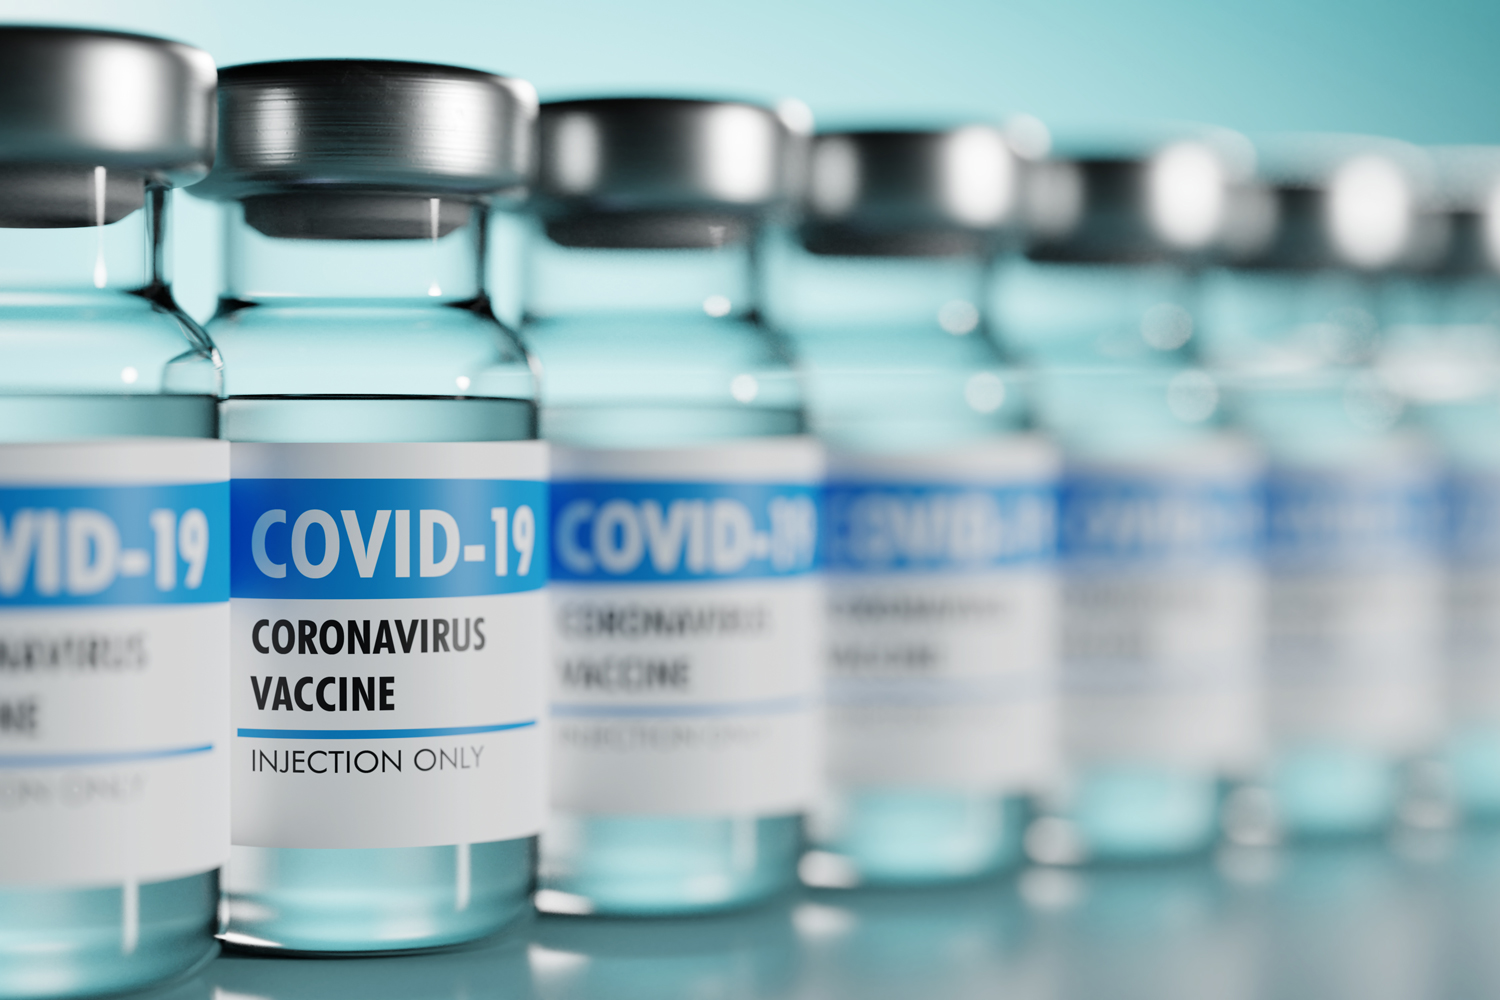 T Cells Key to COVID-19 Vaccination Efforts